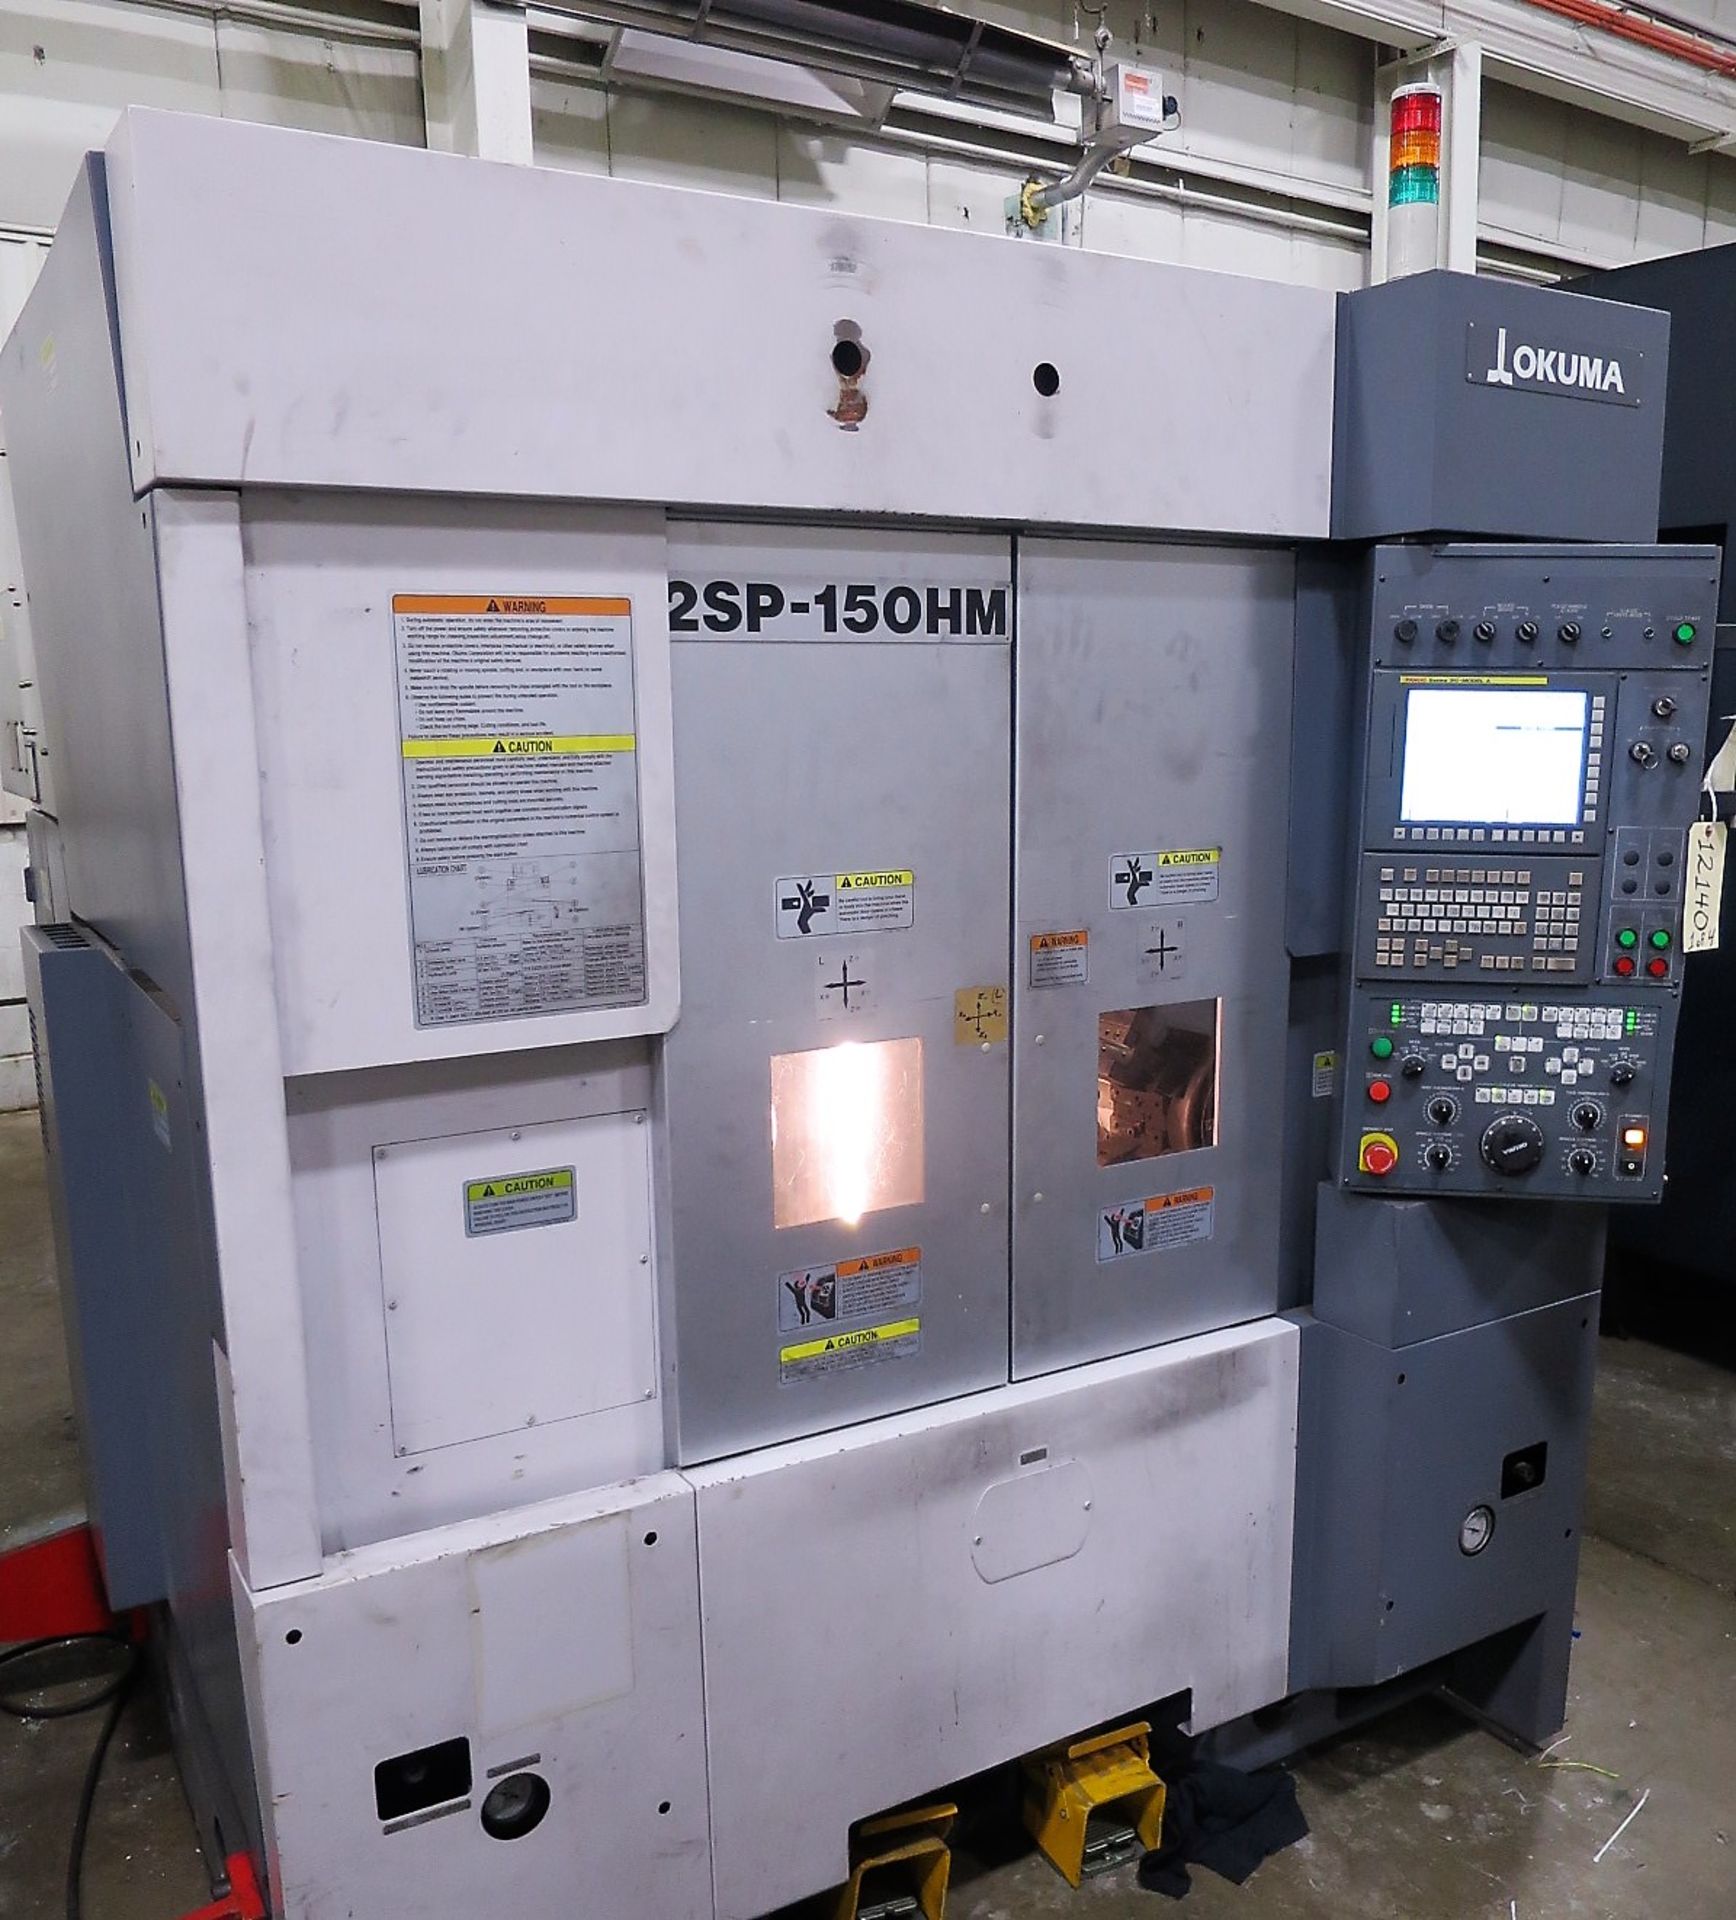 Okuma 2SP-150HM Twin Spindle 3-Axis Turning Center w/Live Milling, S/N 2SP-150HM, New 2011